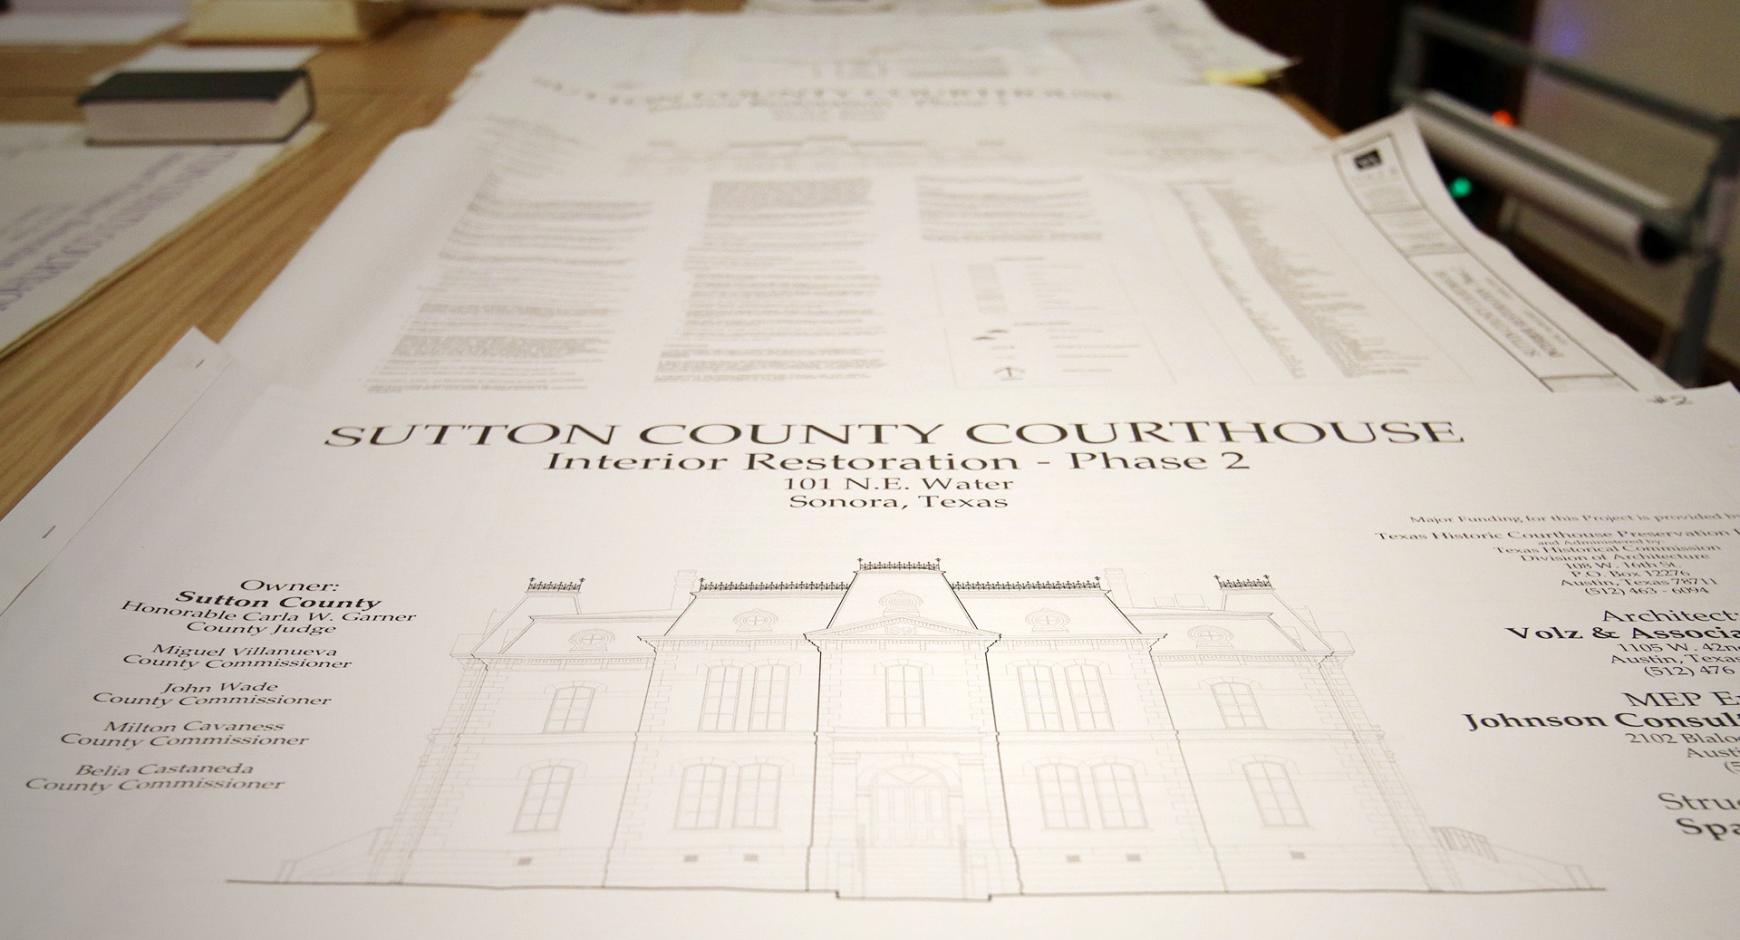 Sutton County Courthouse Interior Restoration Drawing from the archives of Volz & Associates, Inc